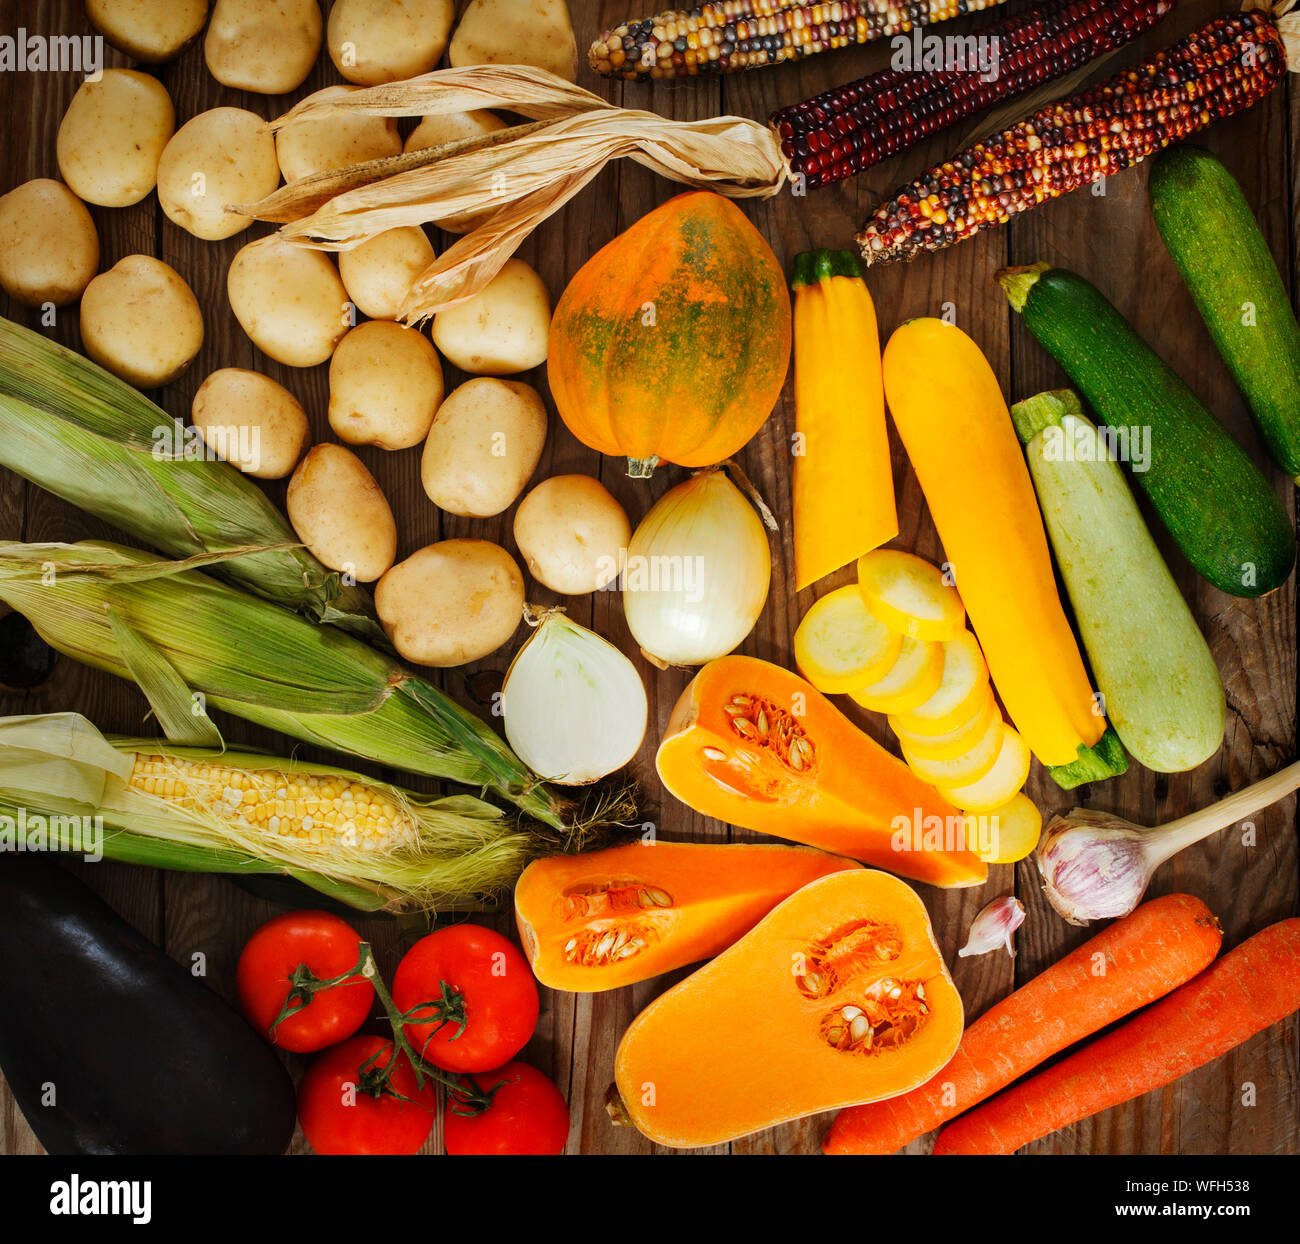 Arrangement of various fruit and vegetables on a wooden table Stock Photo